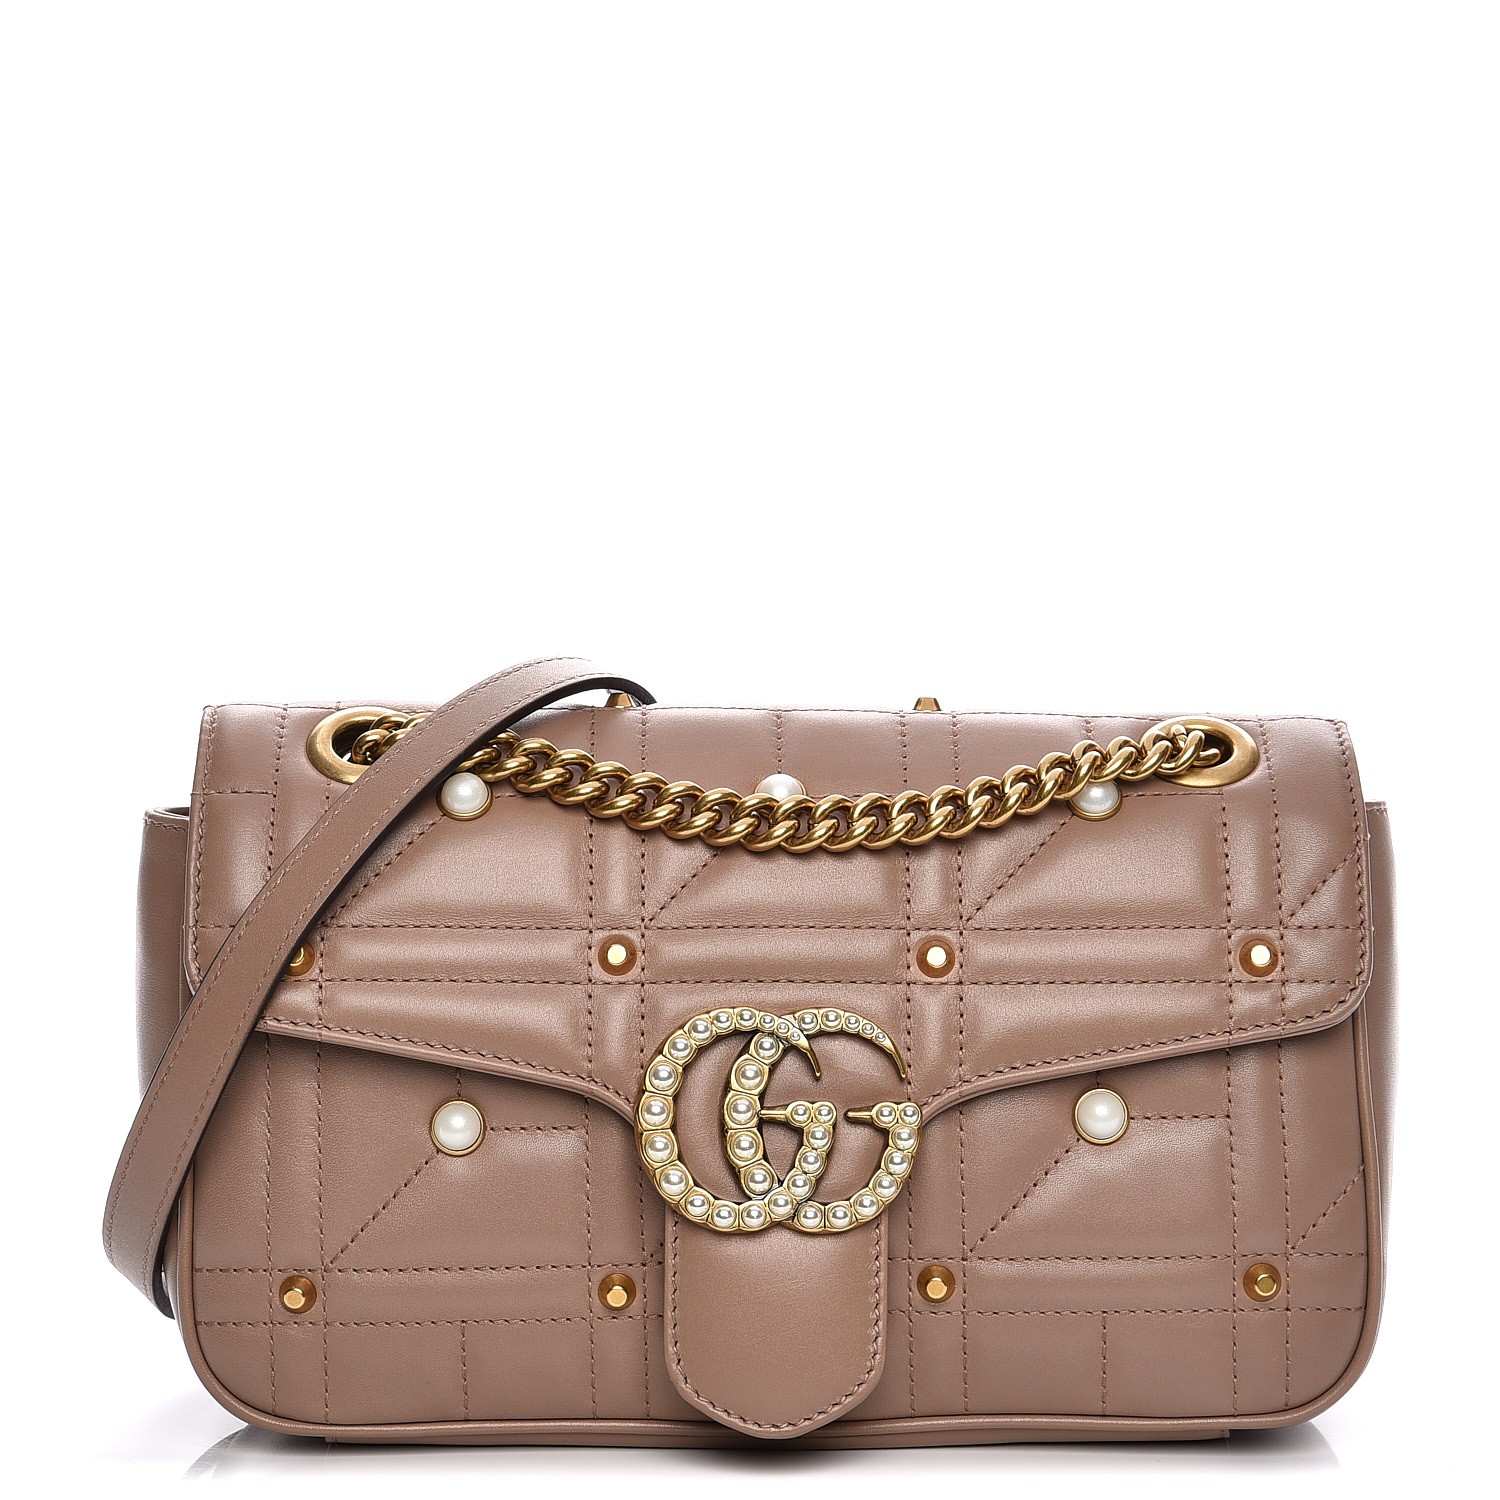 gucci marmont bag with pearls